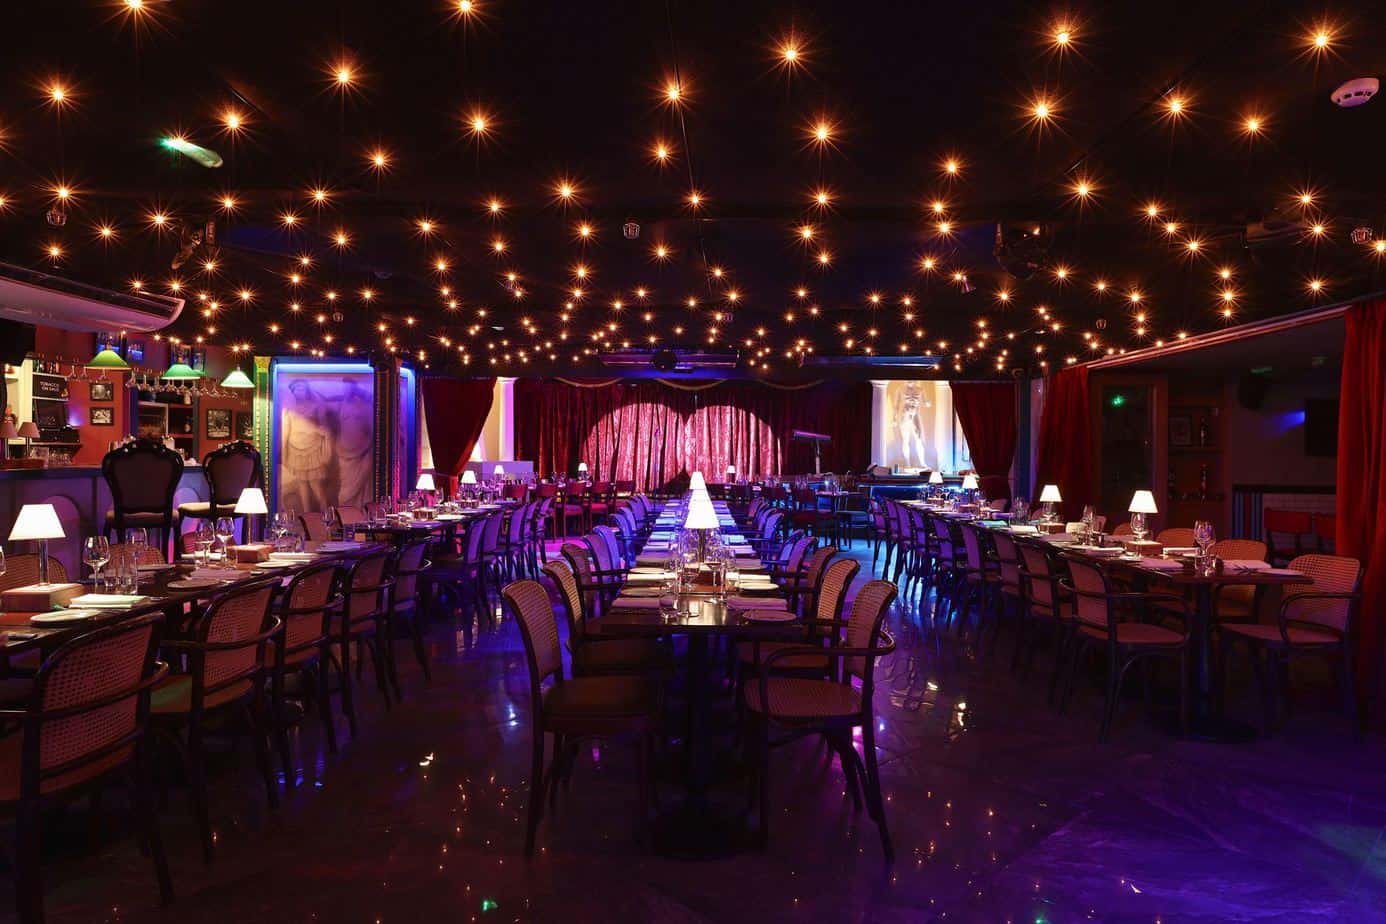 Richly decorated event space with live entertainment